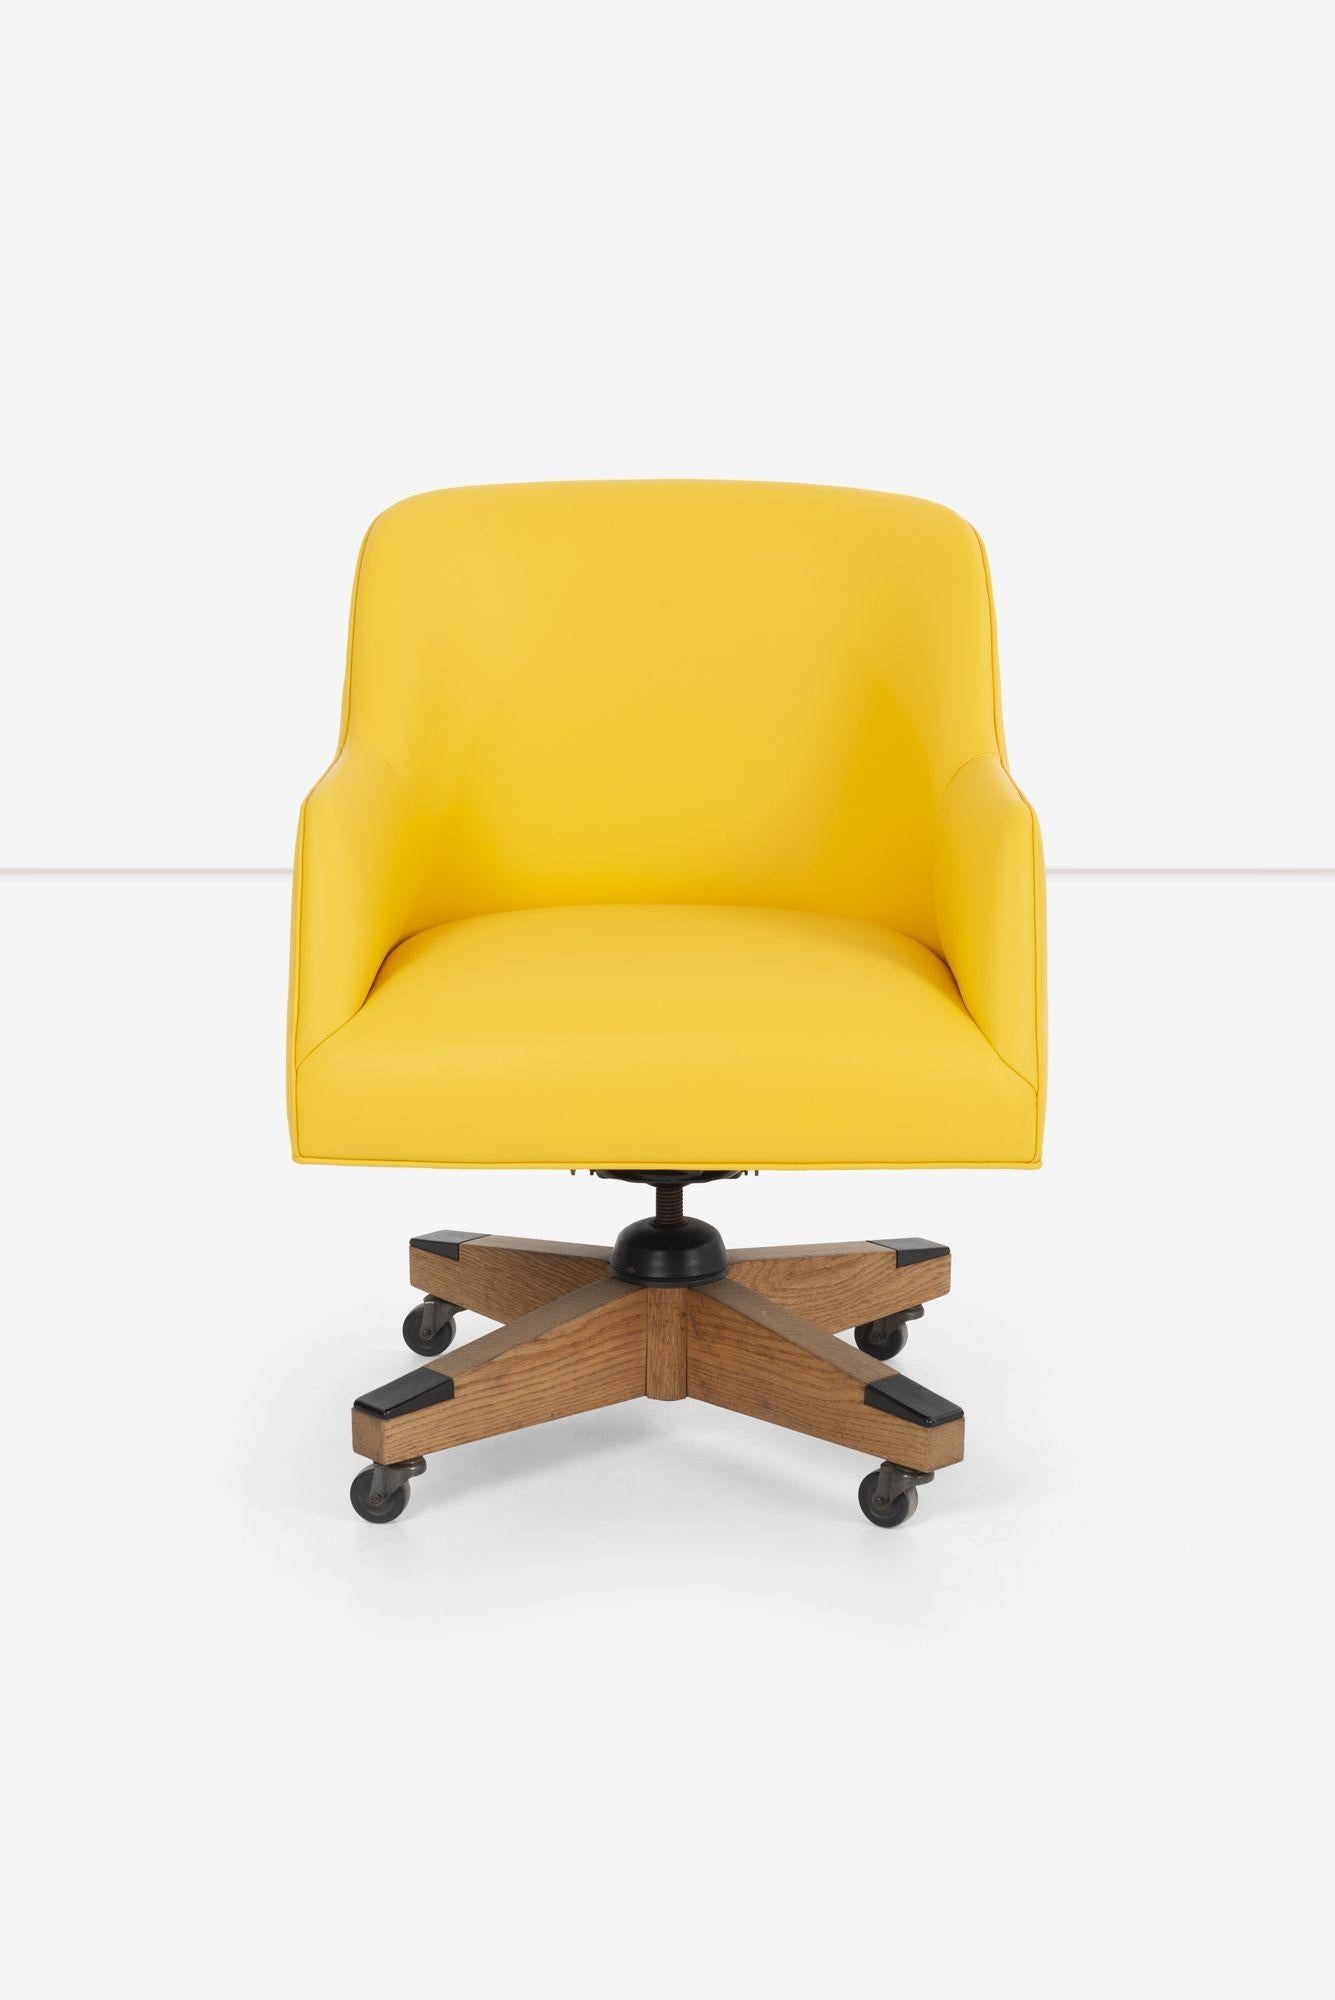 Jens Risom desk chair, solid oak base reupholstered with yellow Spinneybeck lesther, Adjustable seat, tilts and swivels
 
Measures: H: 31.5